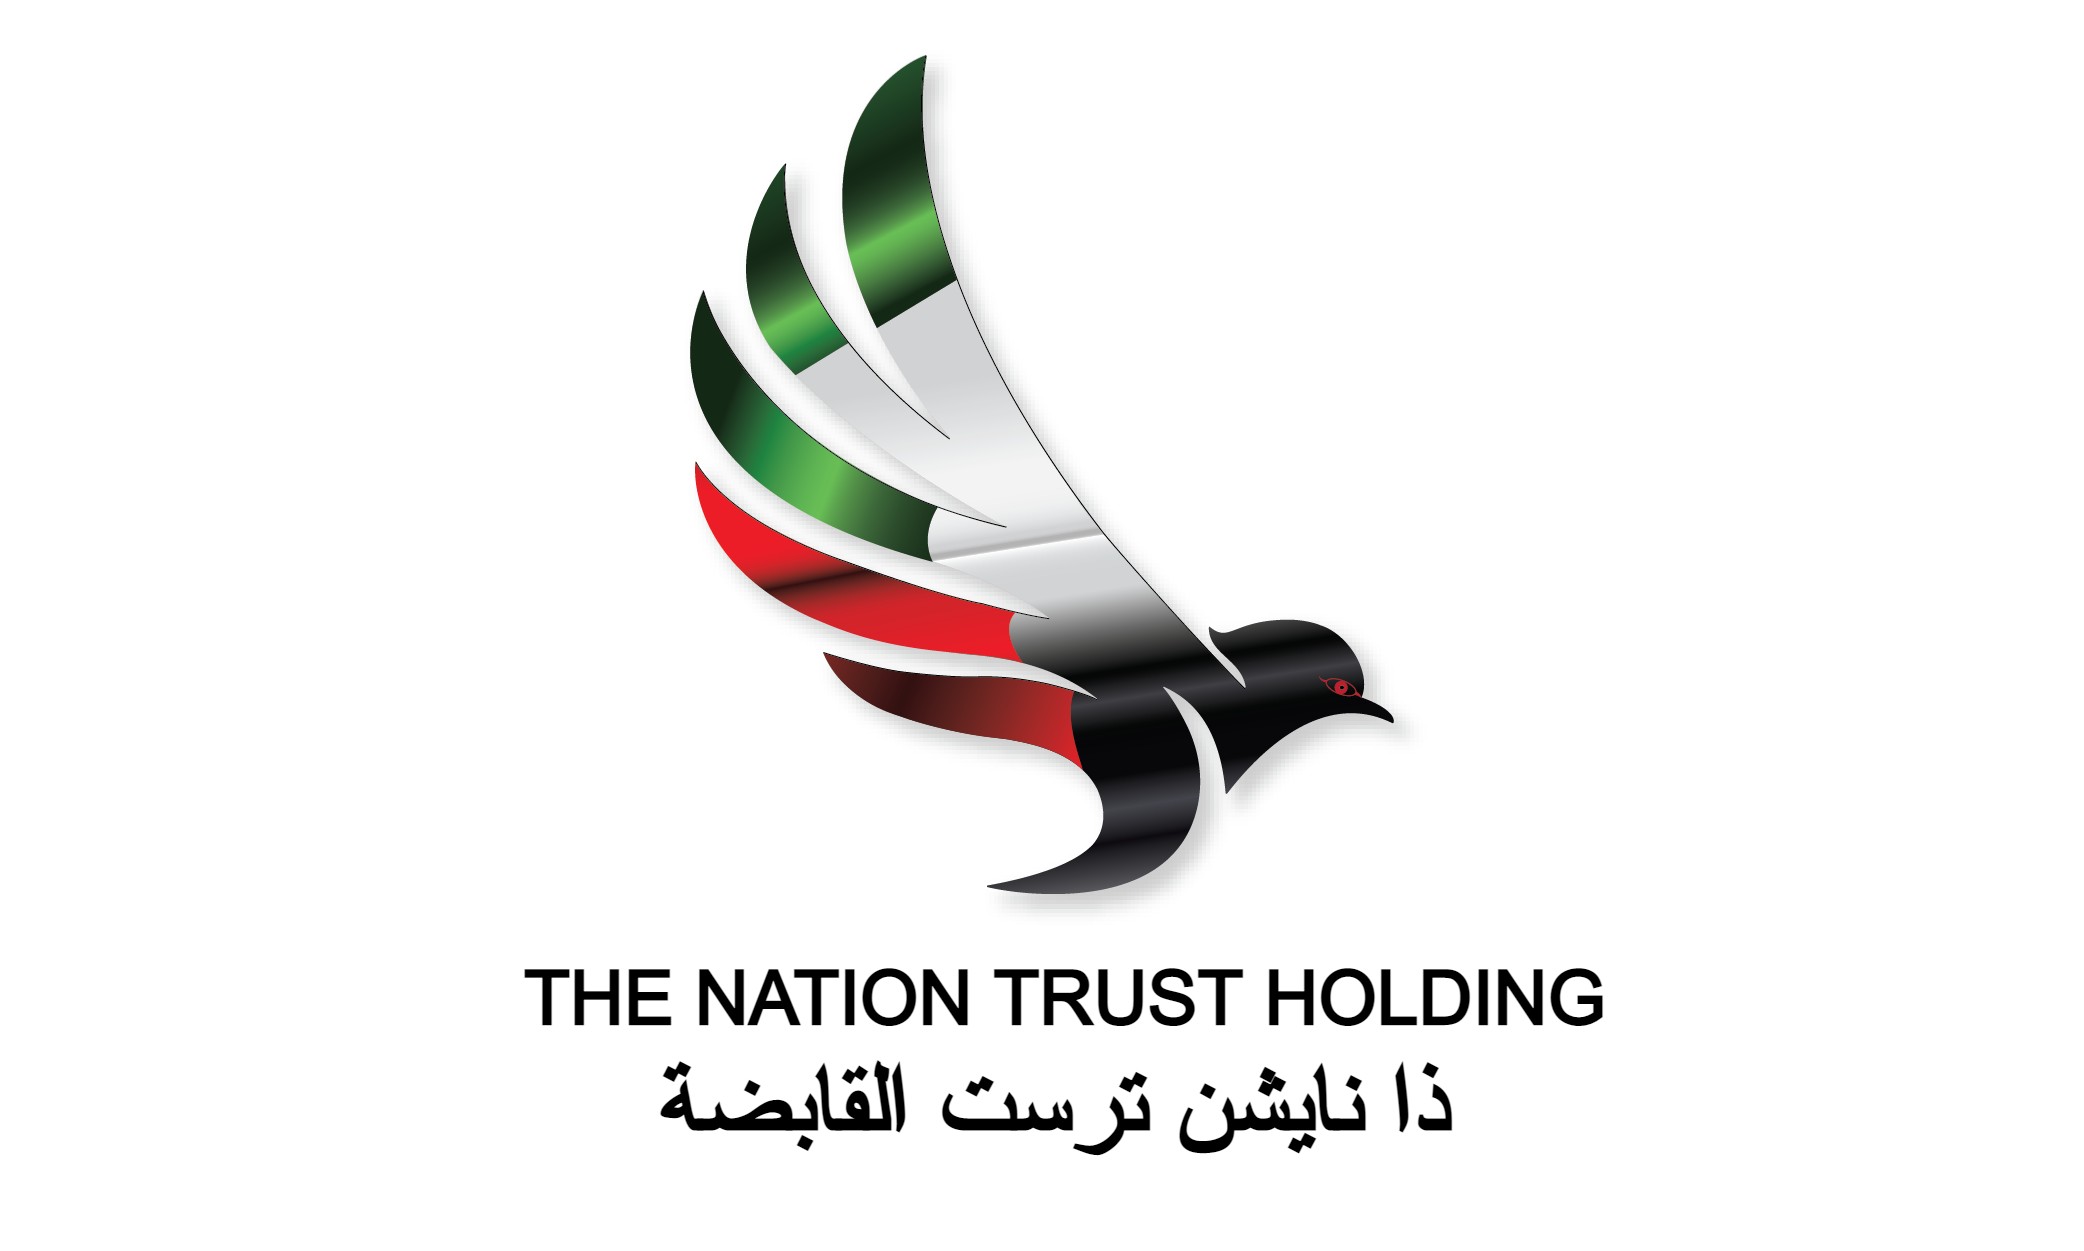 THE NATION TRUST HOLDING